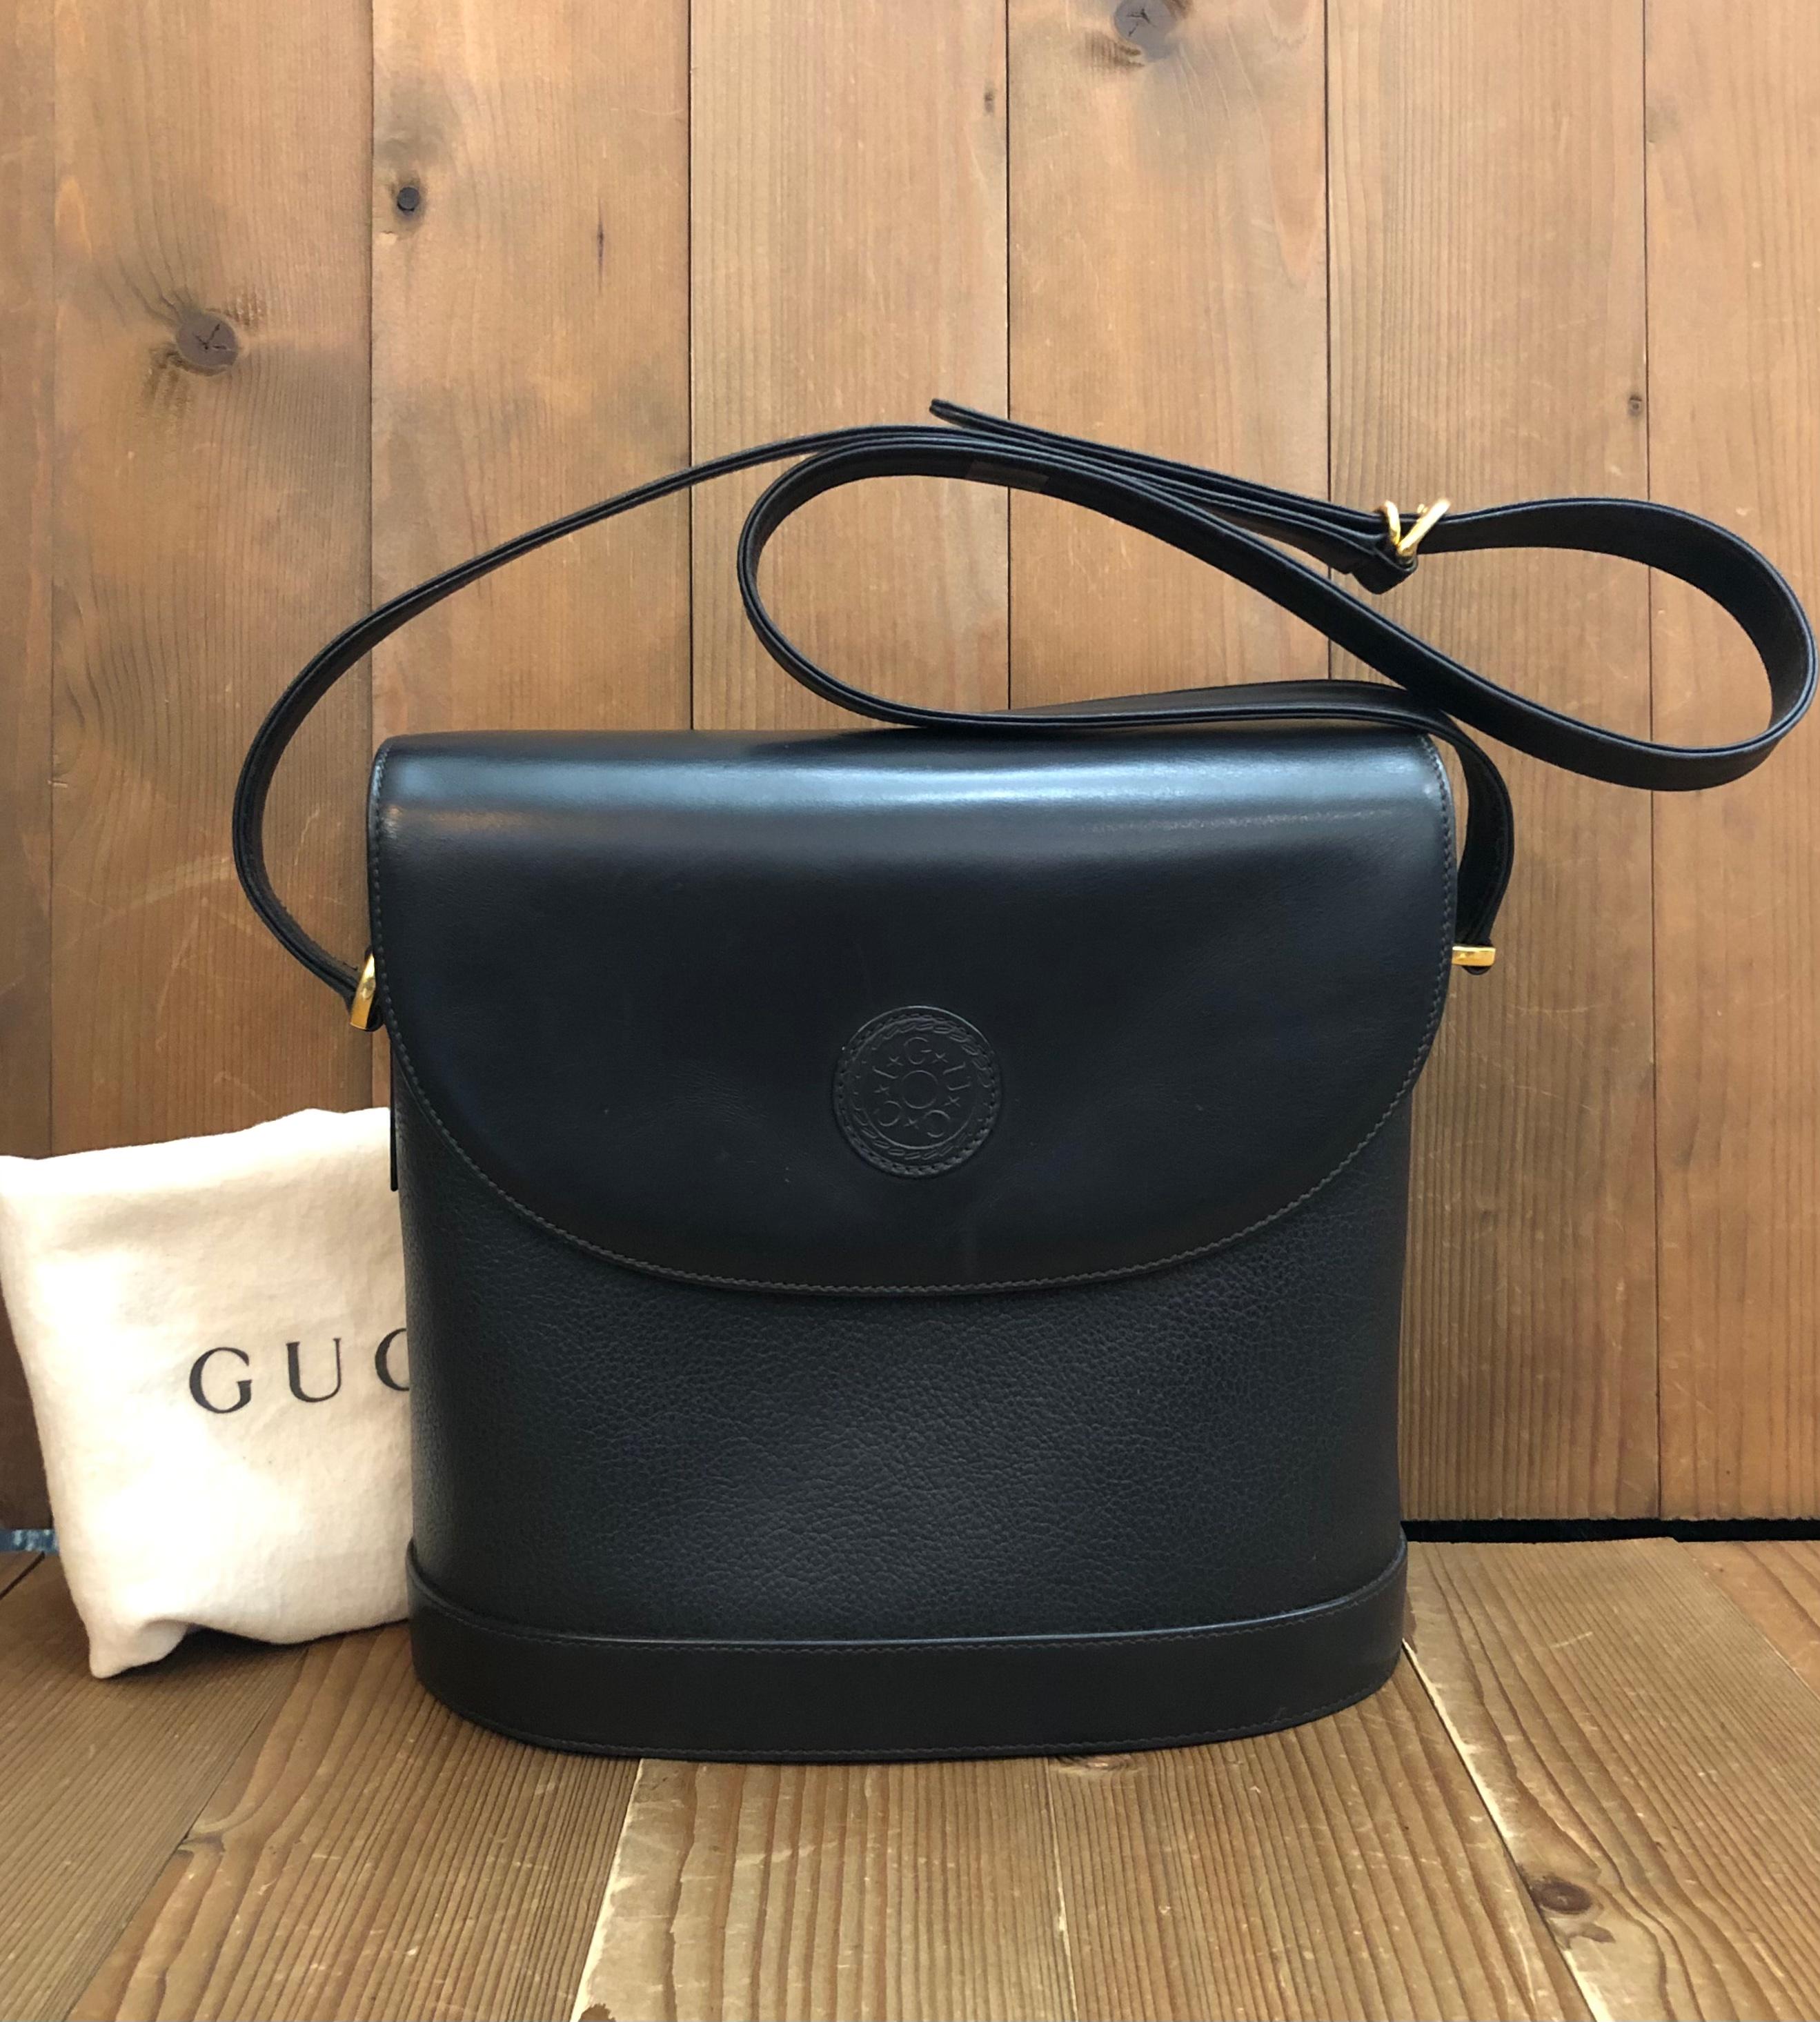 This vintage GUCCI box bucket shoulder bag is crafted of smooth and grained calfskin leather in black featuring gold toned hardware. Front magnetic snap closure opens to a luxurious suede interior featuring a zippered pocket. Adjustable shoulder